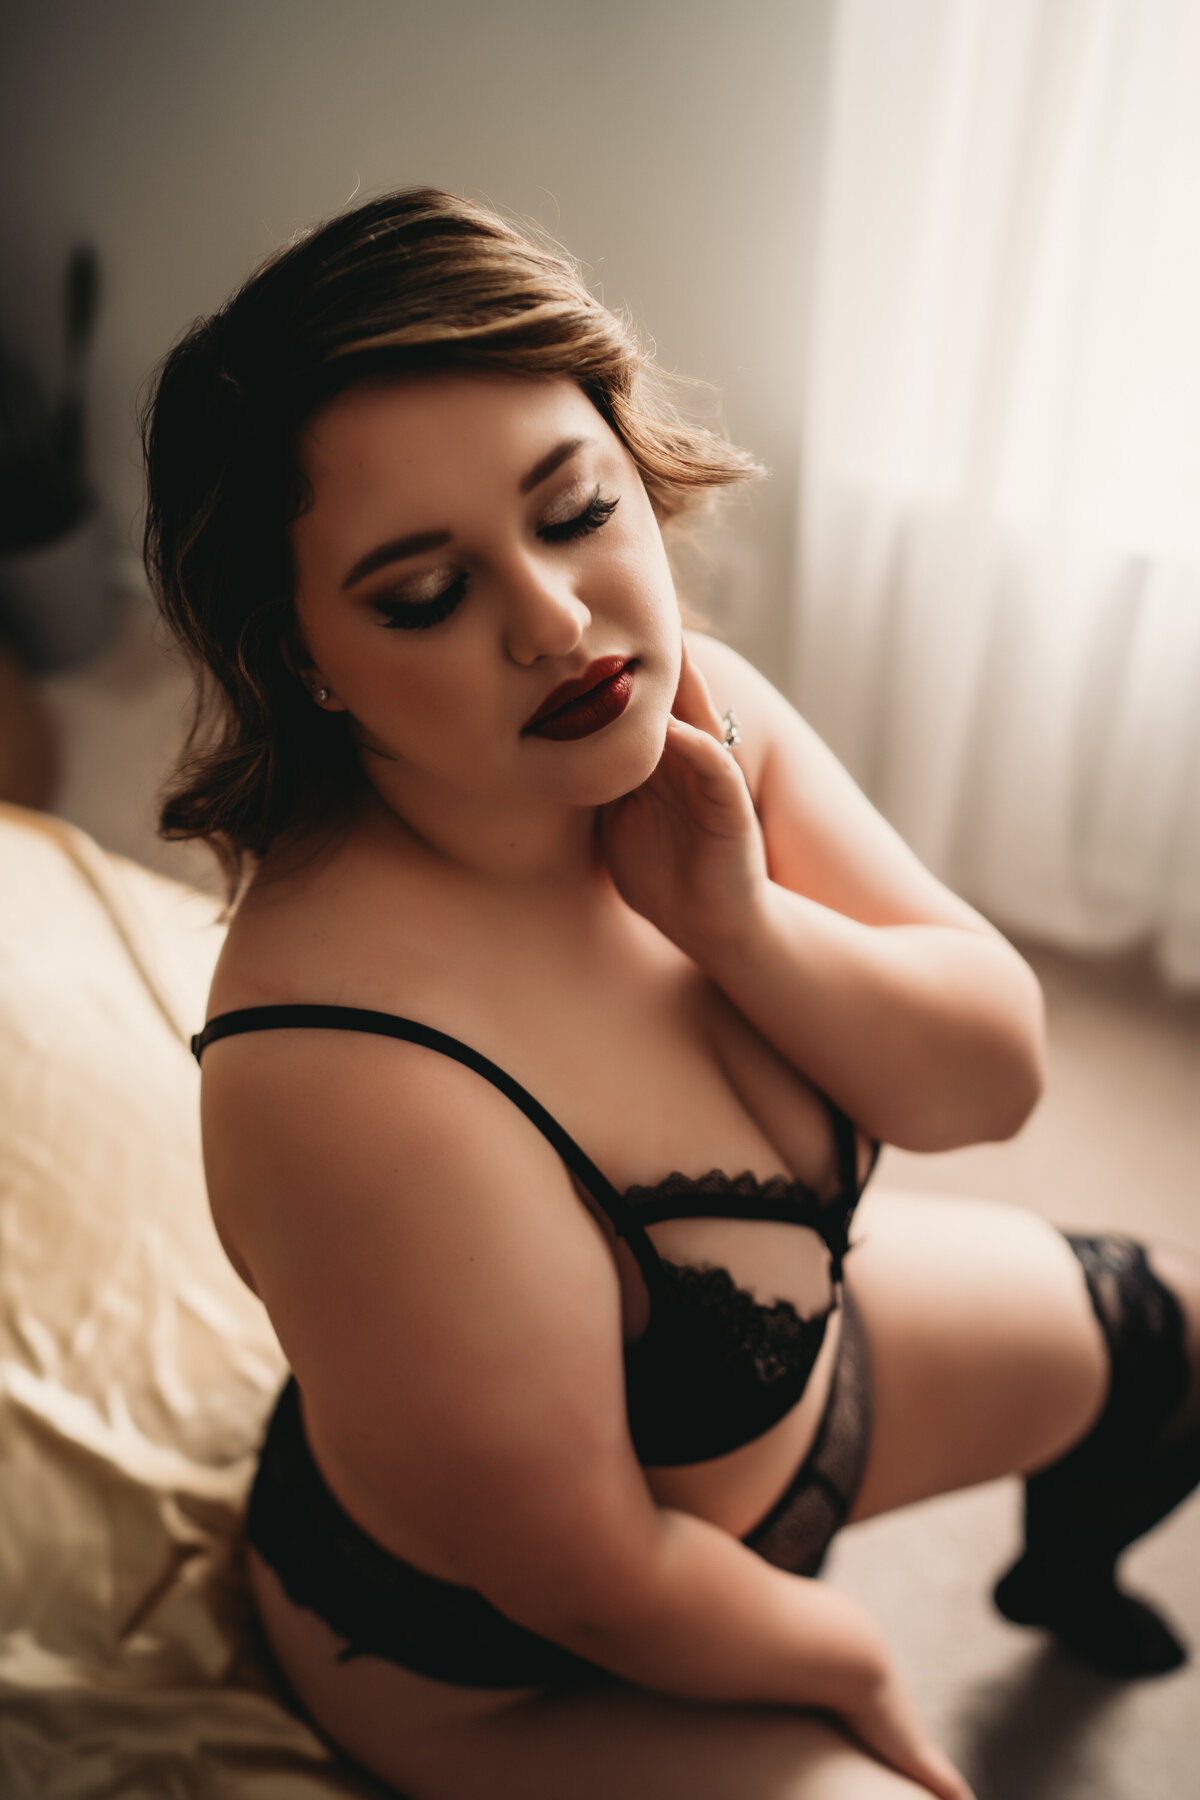 Lady sitting on bed in lingerie